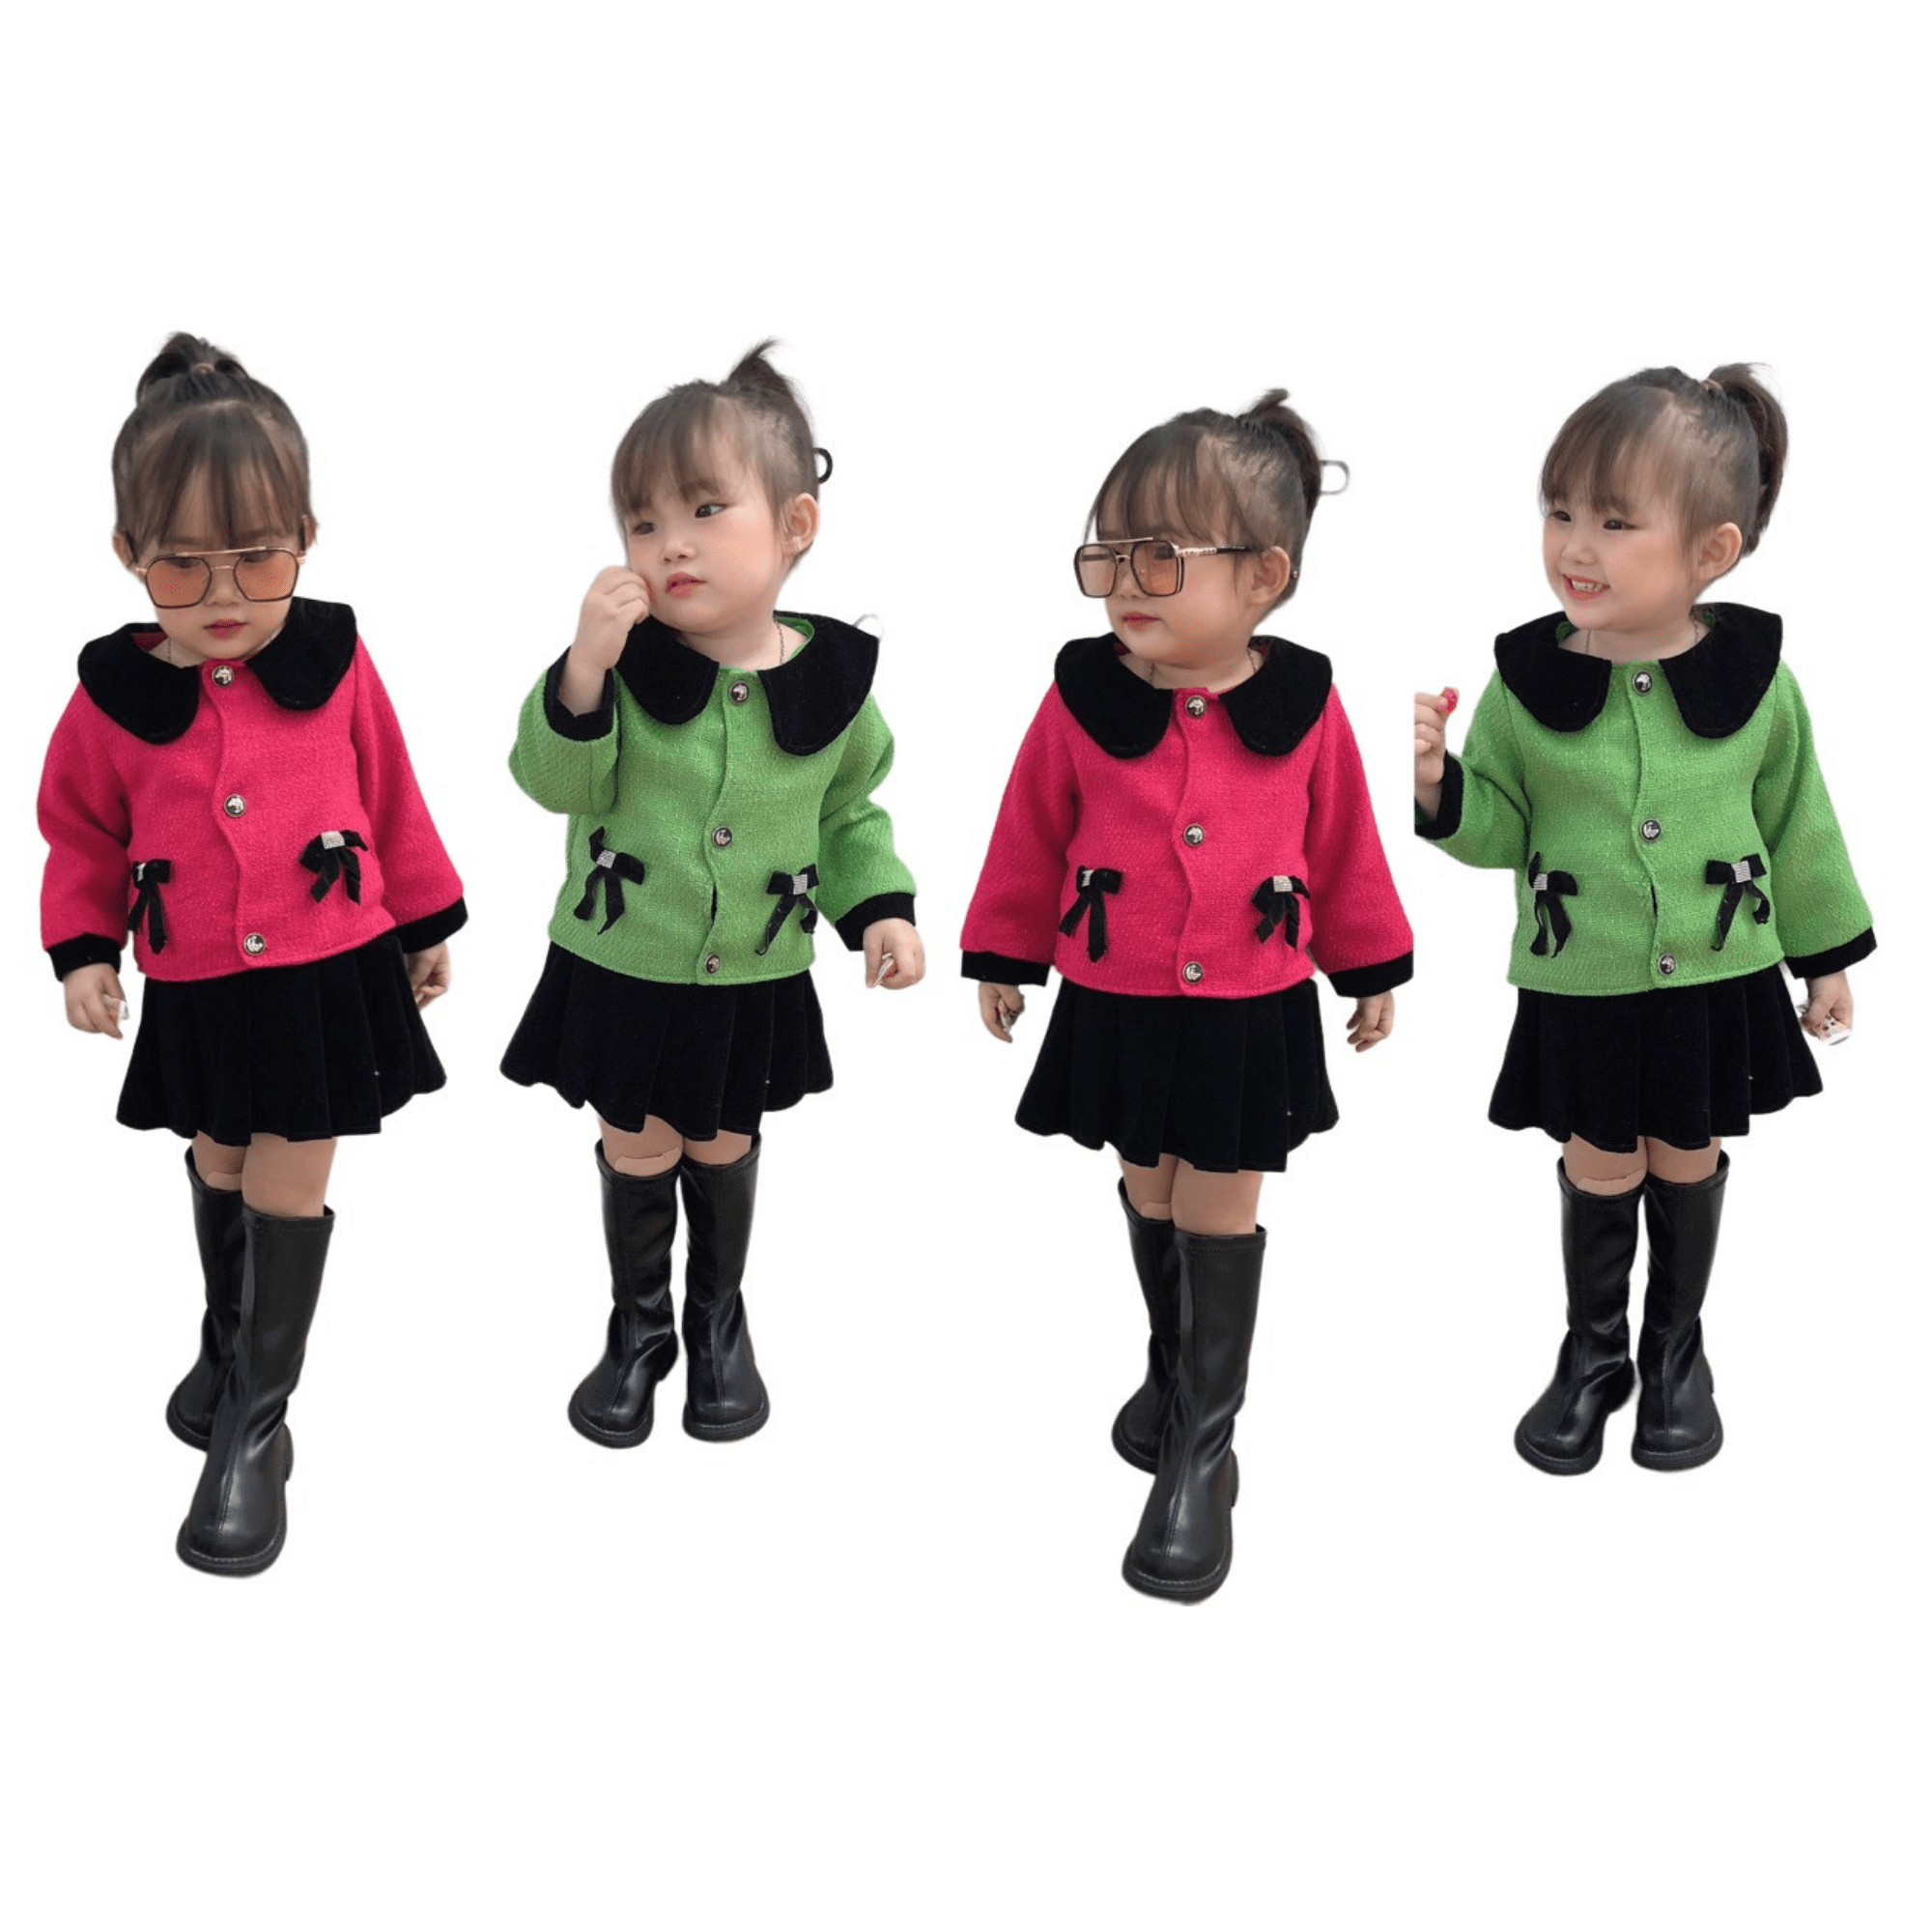 Kids Clothes Girls Customized Service Natural Dresses New Fashion Each One In Opp Bag From Vietnam Manufacturer